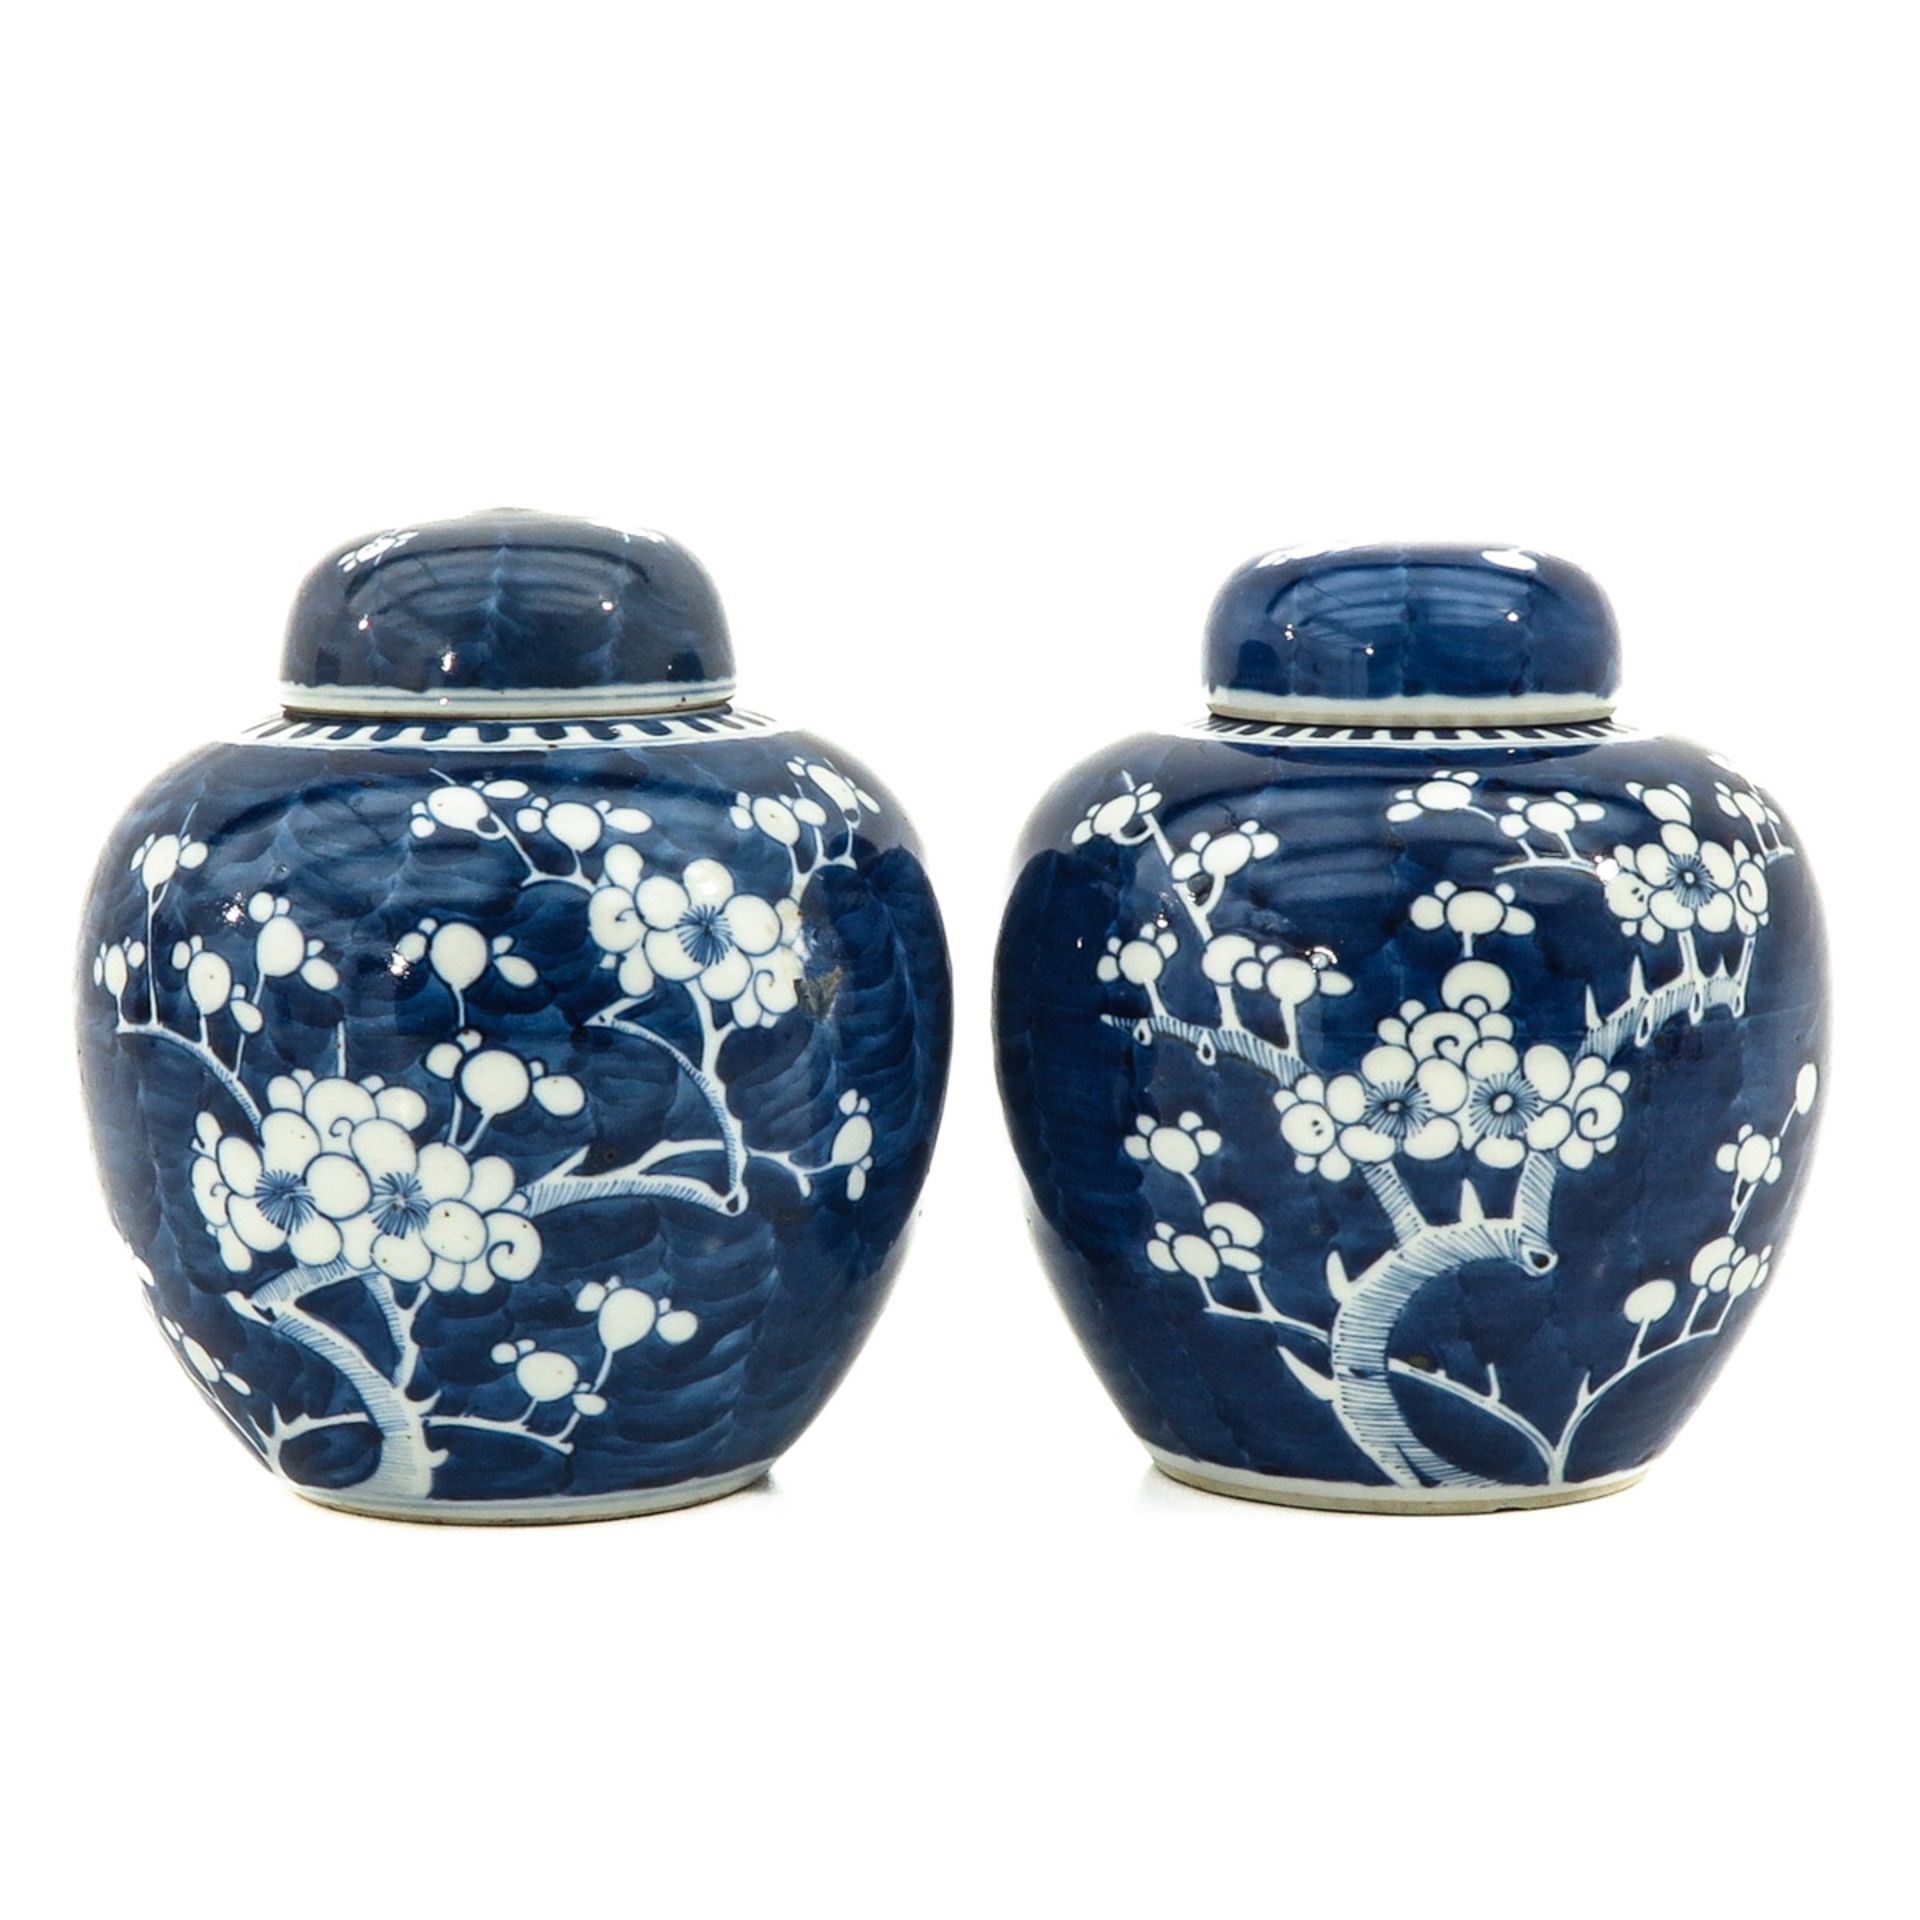 A Pair of Ginger Jars - Image 3 of 9